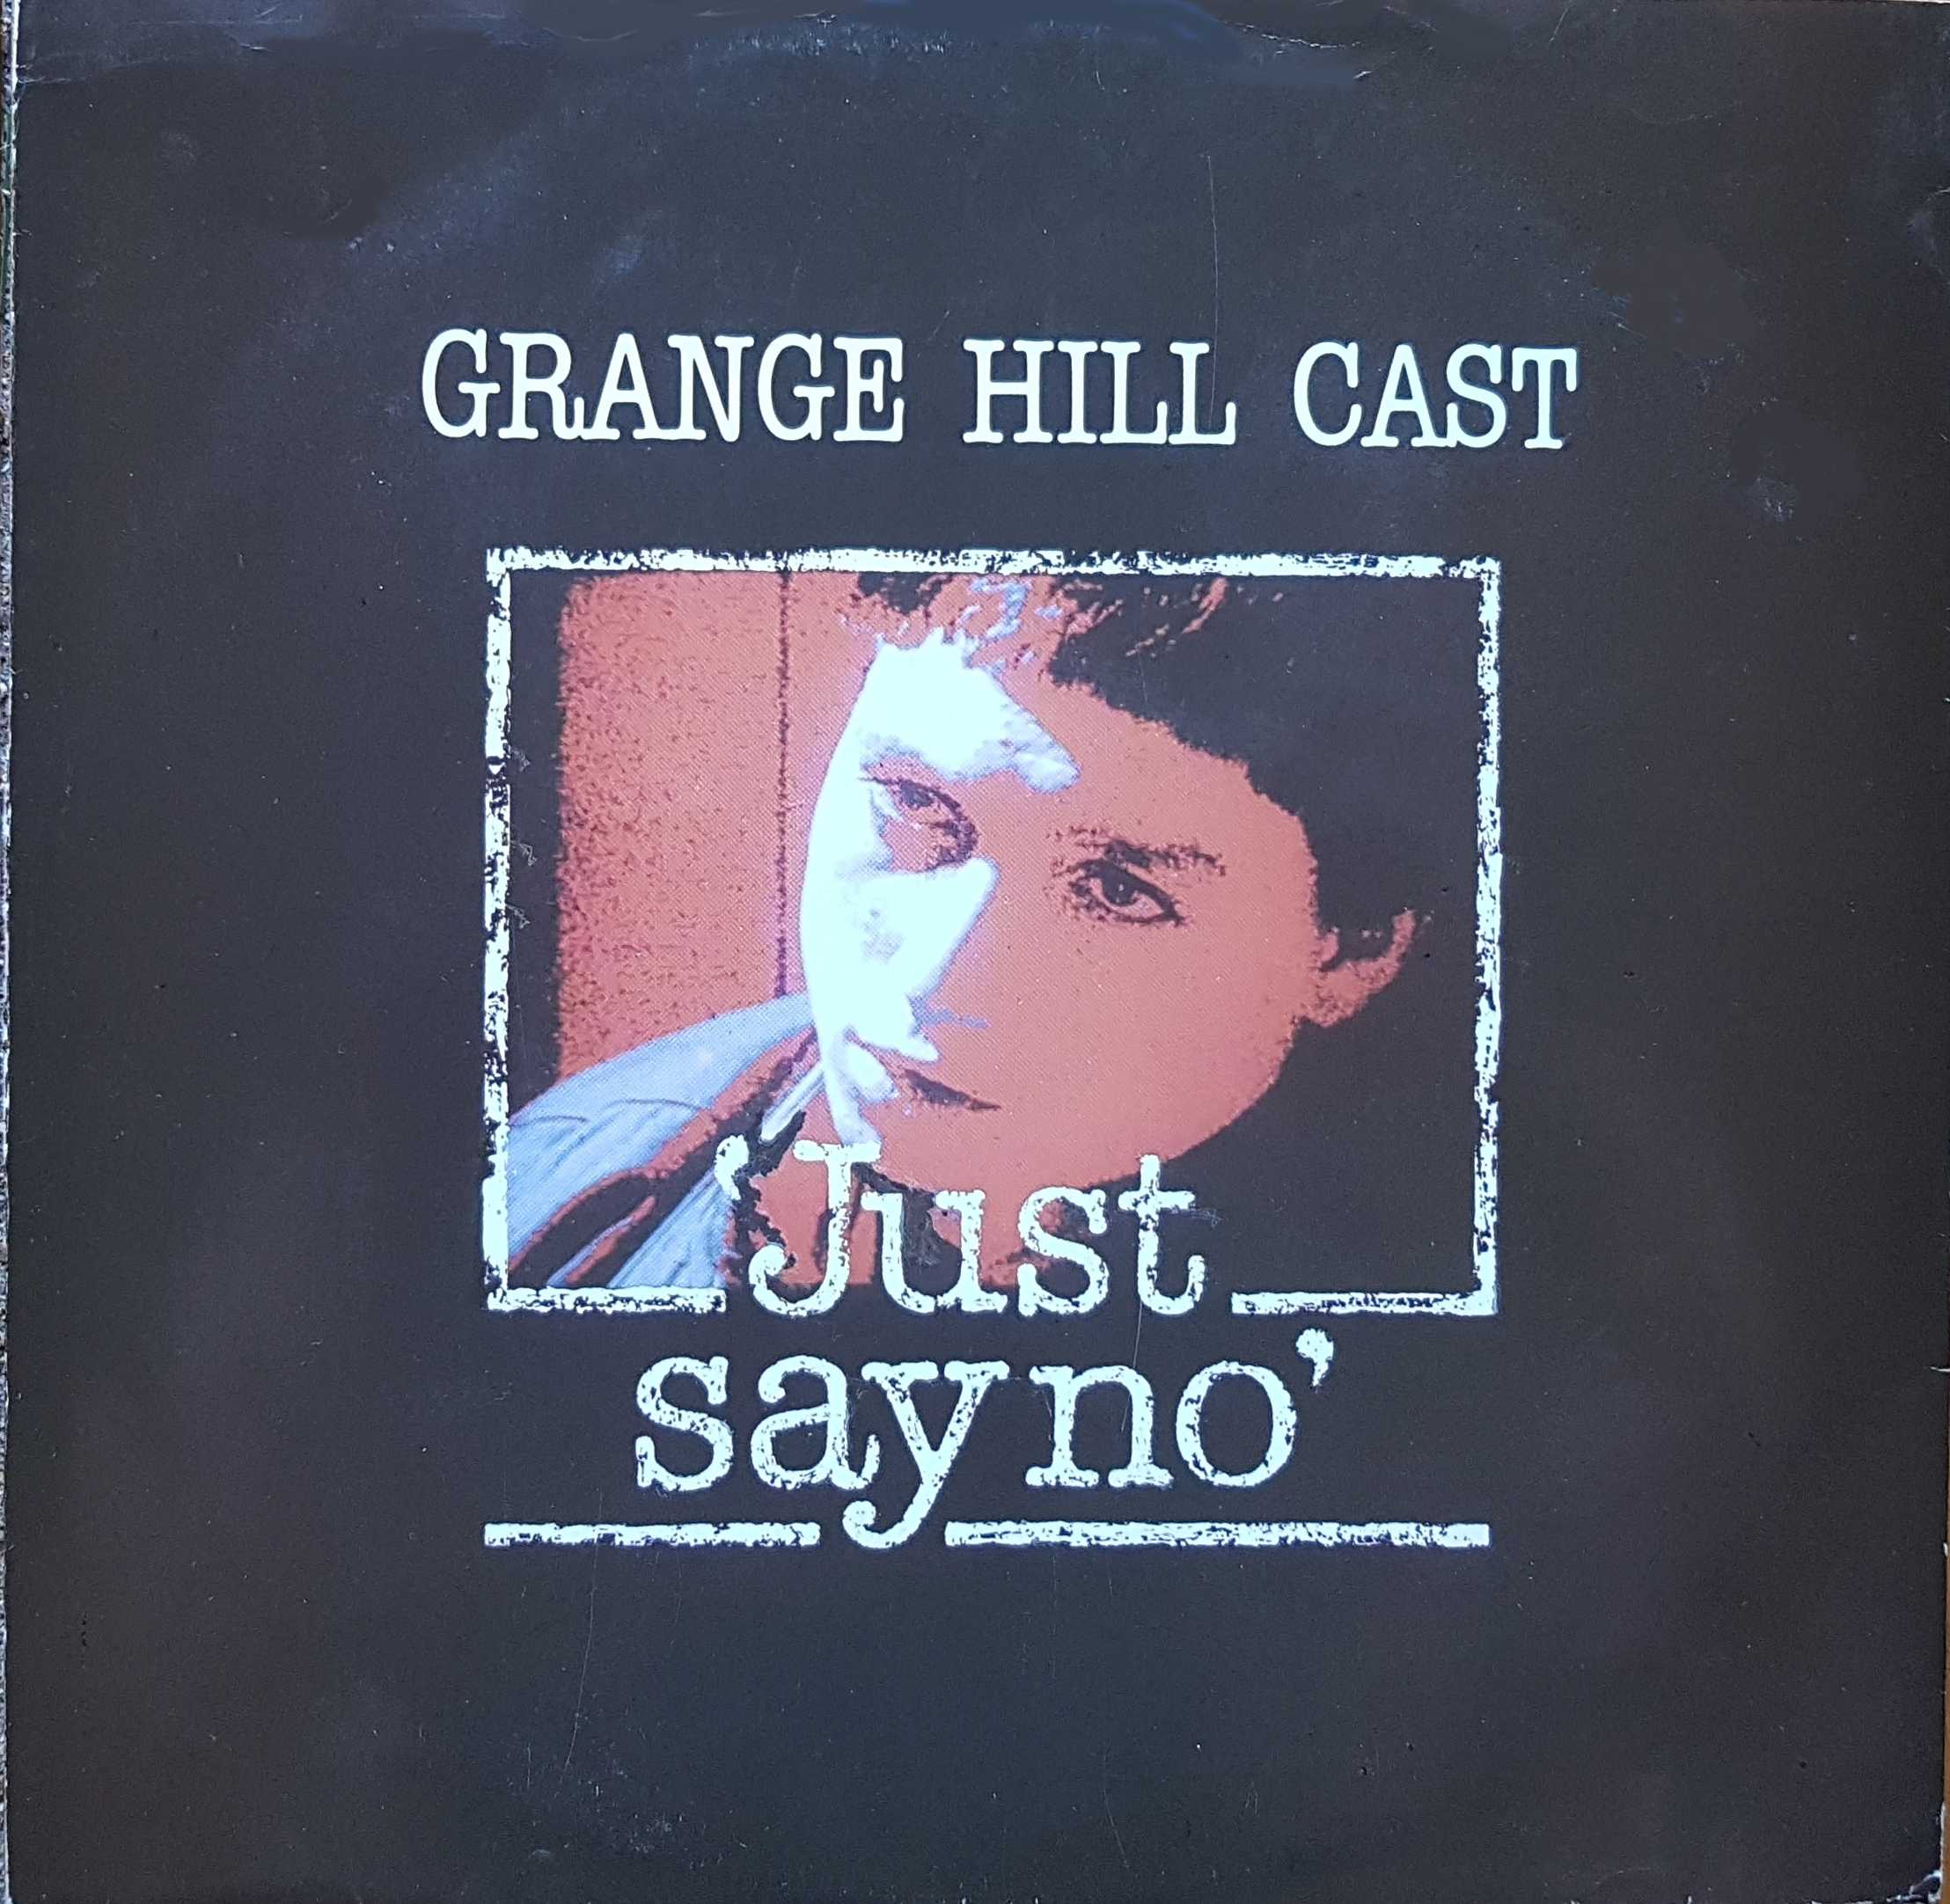 Picture of 12 RSL 183 Just say no (Grange Hill) by artist Grogani / McMahon from the BBC records and Tapes library